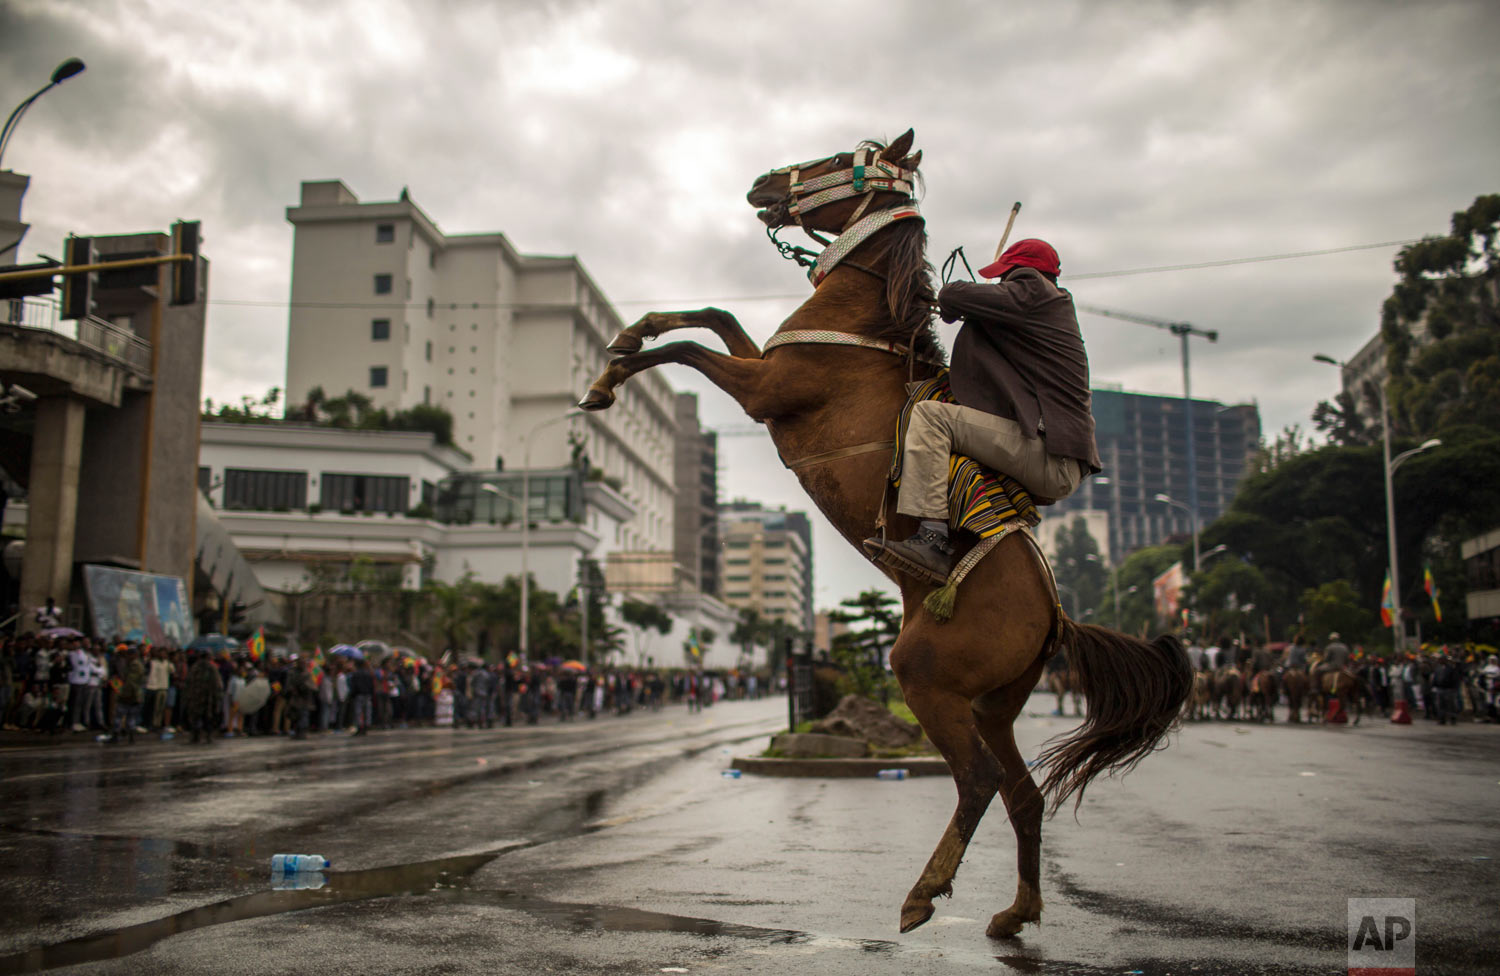  A man rides a rearing horse as hundreds of thousands gather to welcome returning leaders of the once-banned Oromo Liberation Front (OLF) in the capital Addis Ababa, Ethiopia on Saturday, Sept. 15, 2018. The OLF and two other organizations were remov